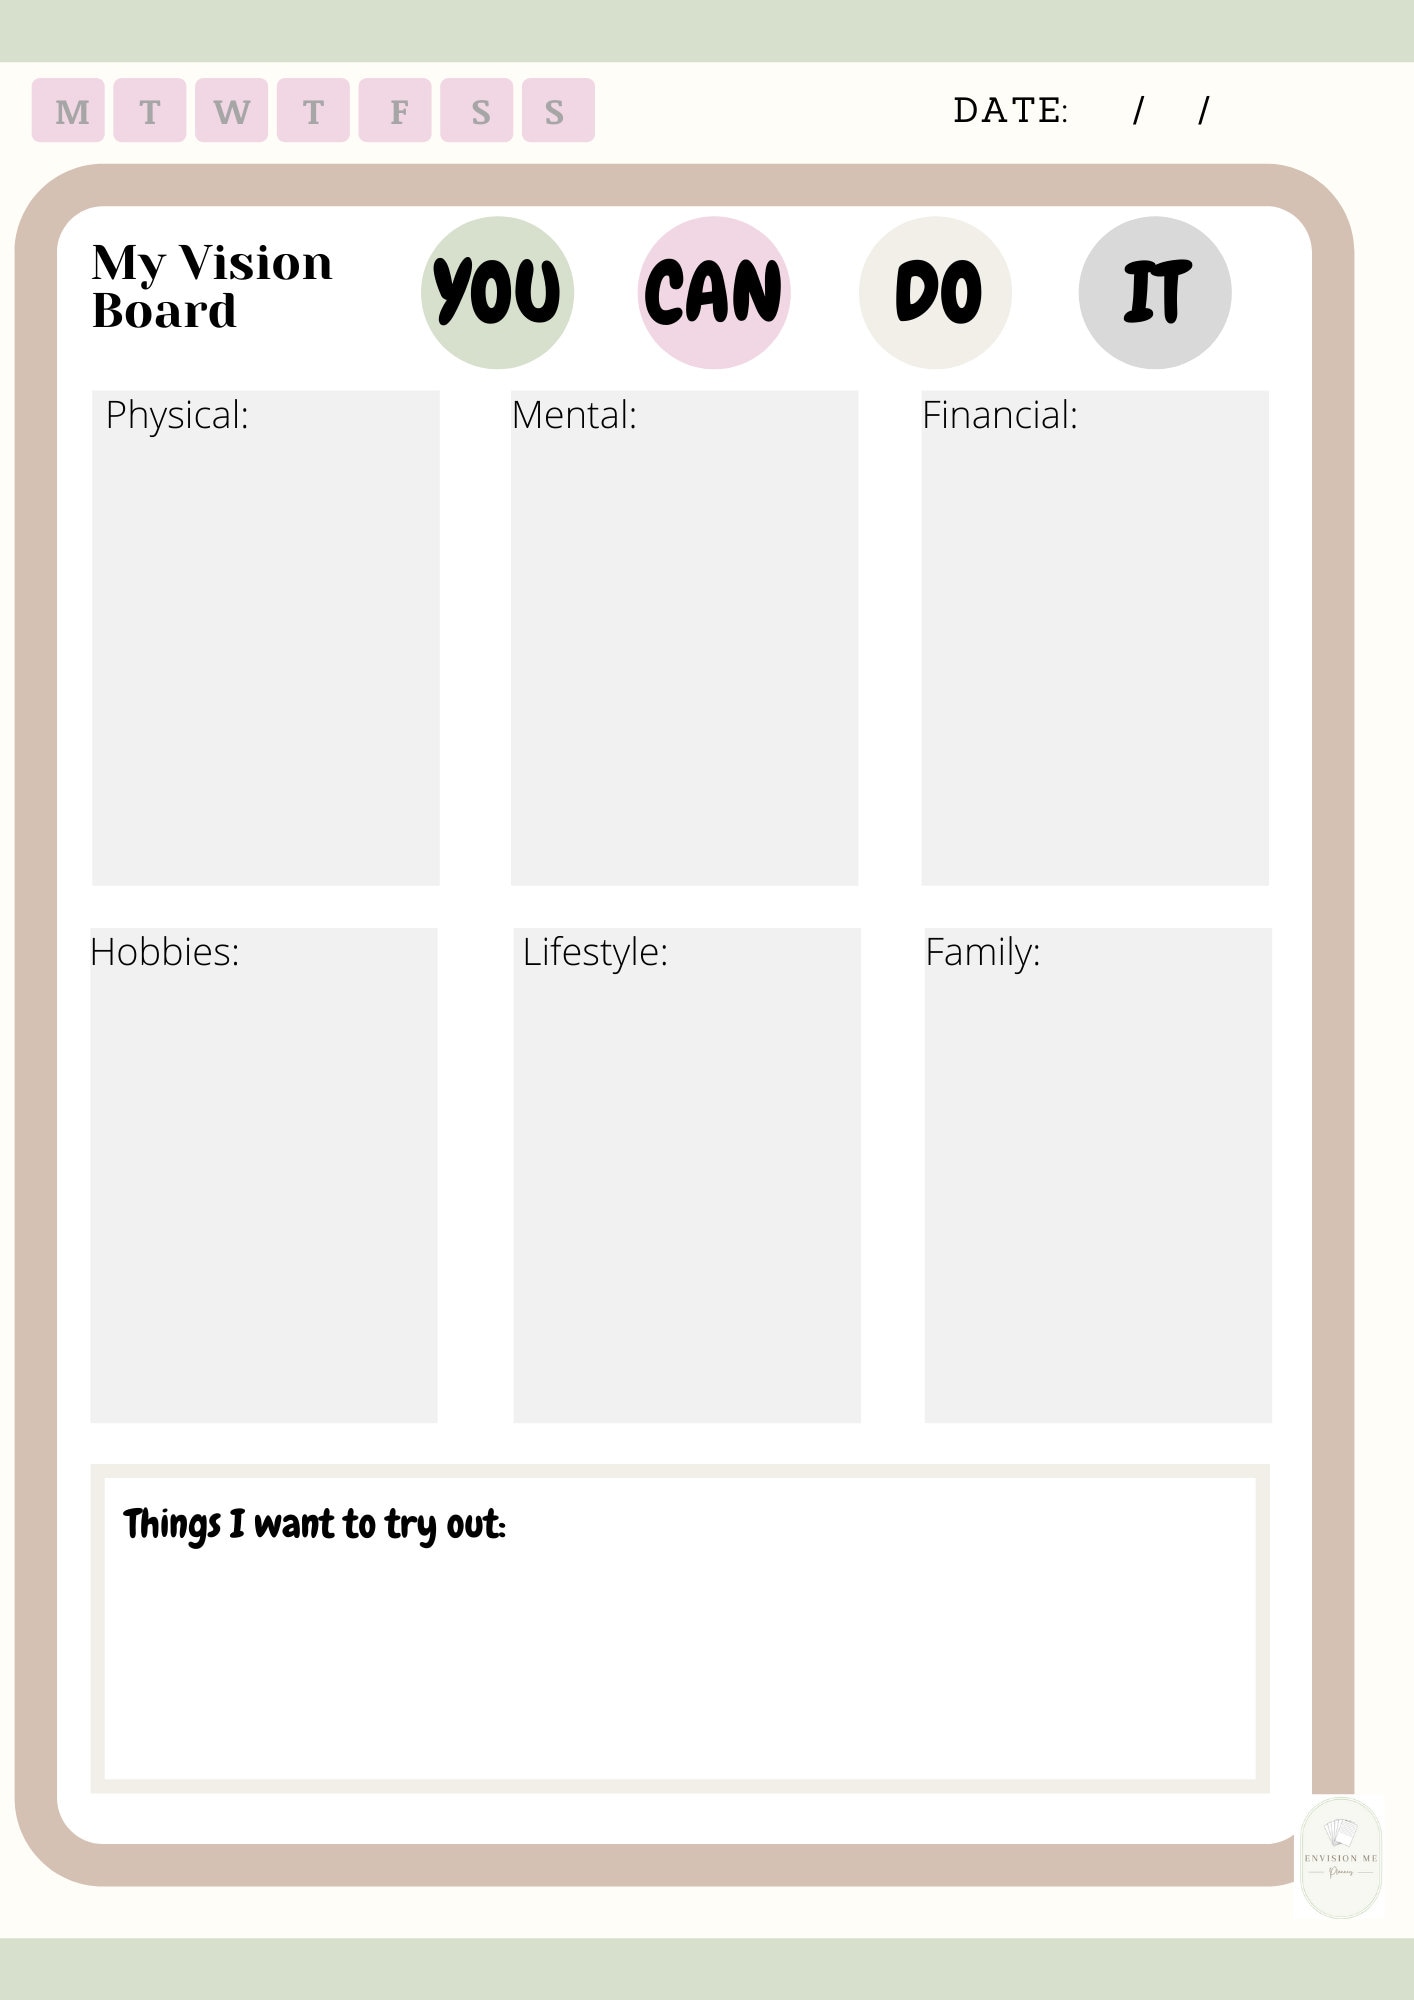 Creating a Vision Board Template That is Portable